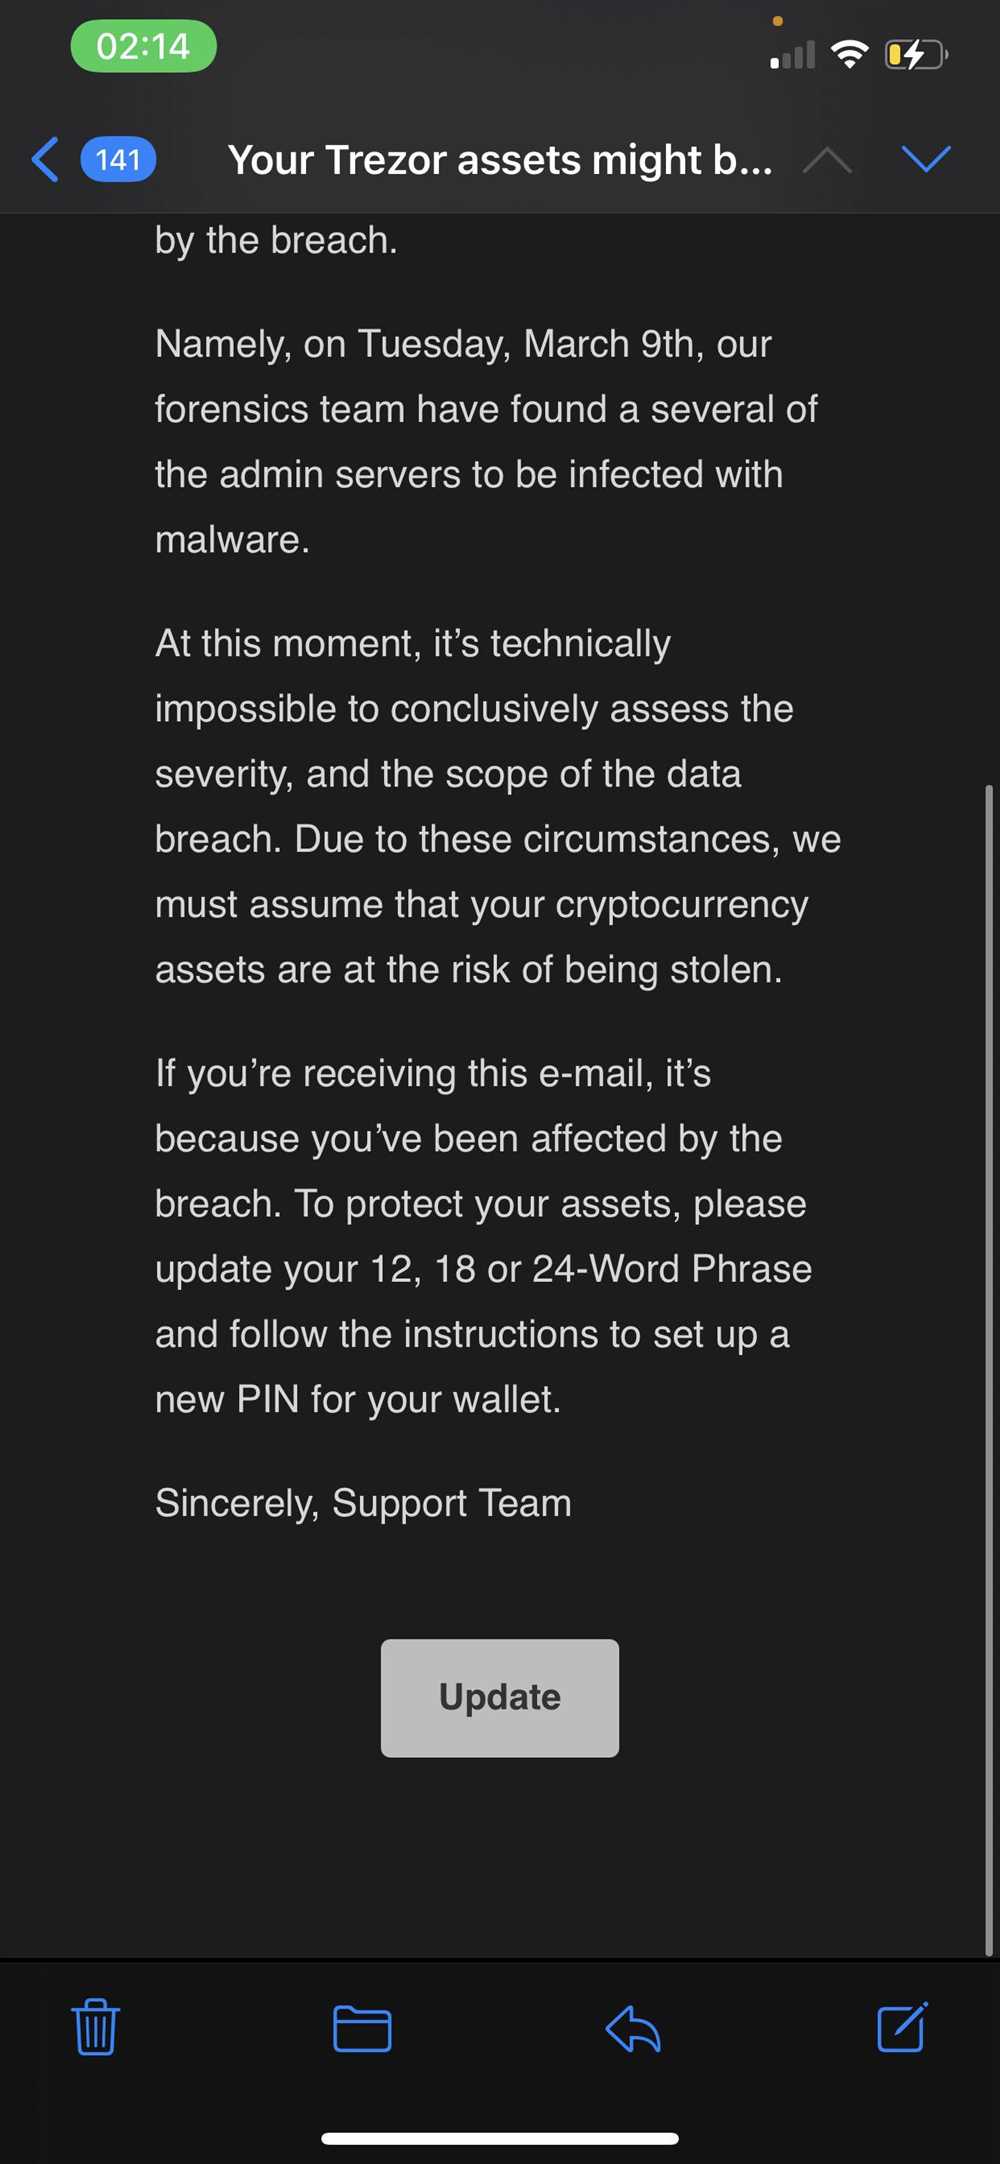 Responding to the Trezor Data Breach: Can the Stolen Funds be Recovered?